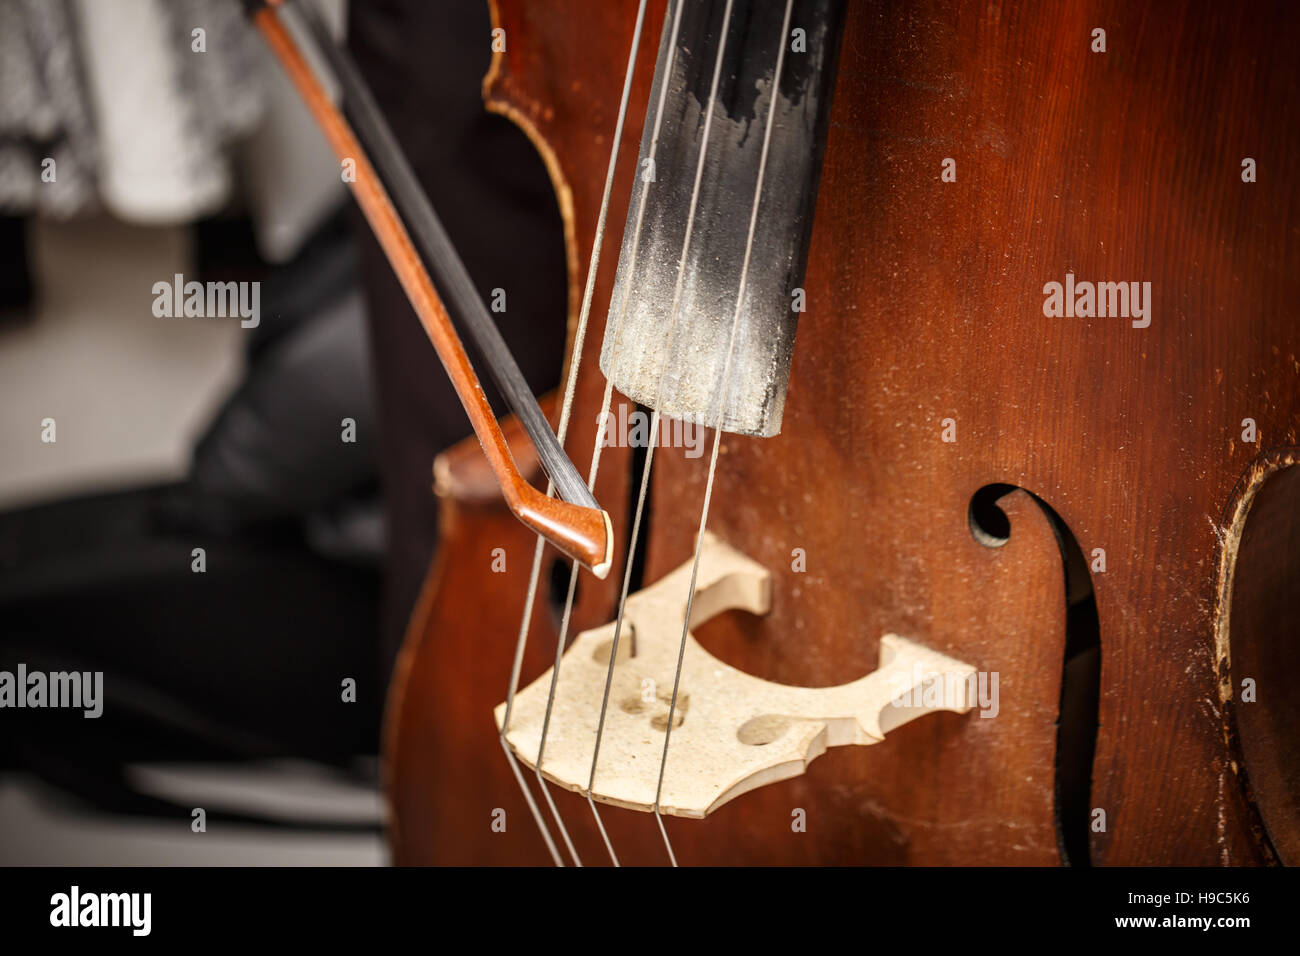 Close-up of double bass, wooden musical instrument Stock Photo